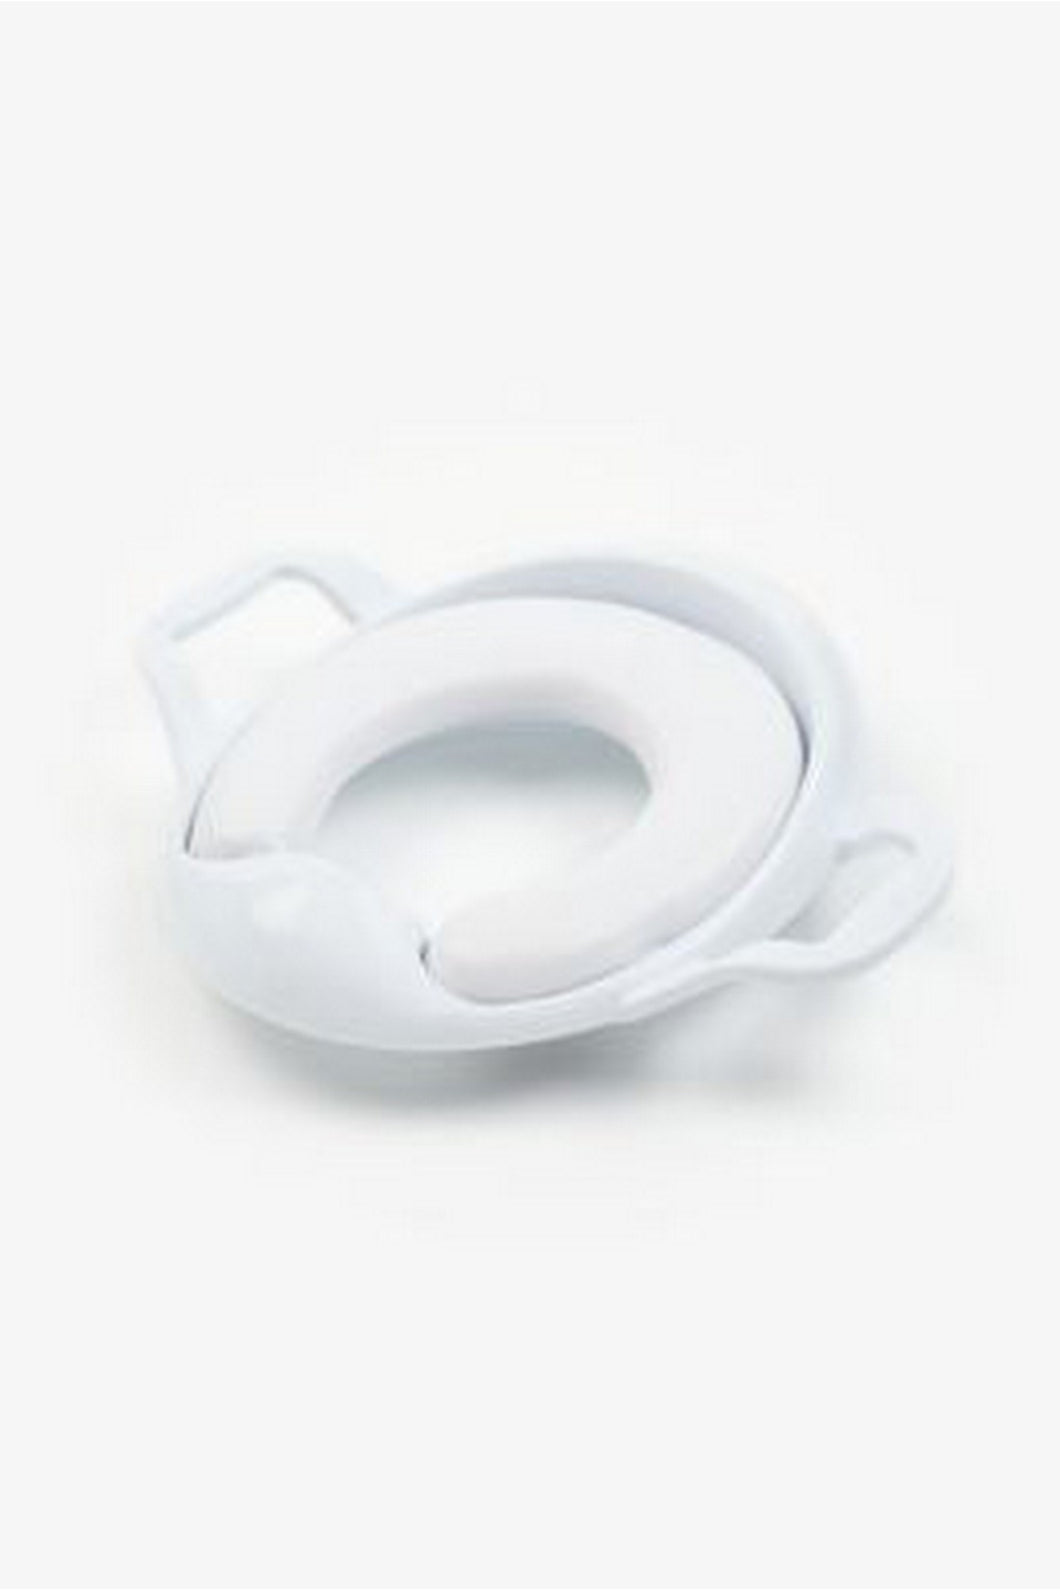 Mothercare Comfi Trainer With Handles White 1